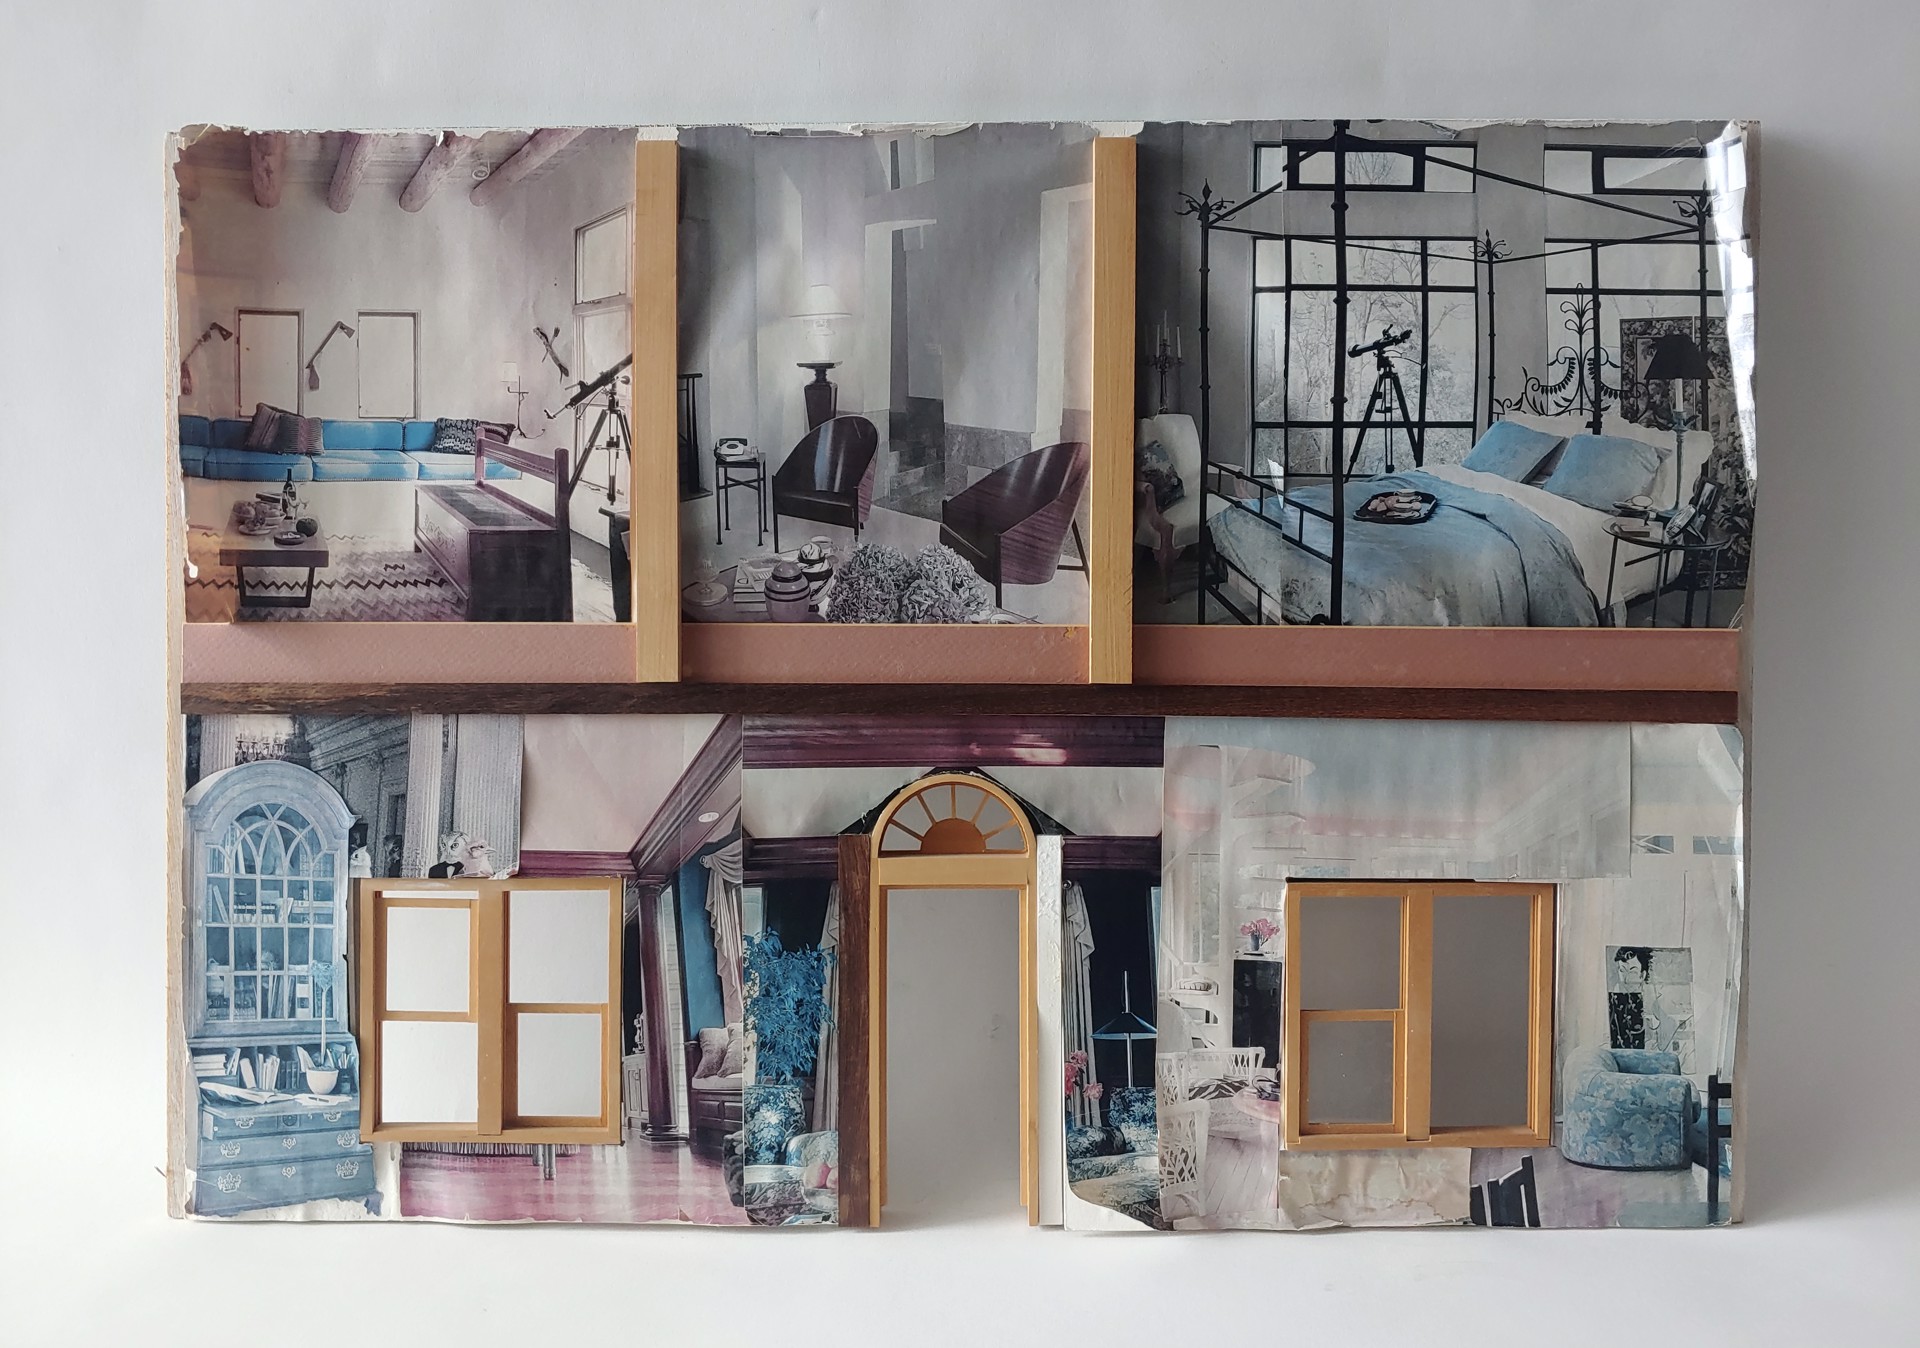 Dollhouse - Photograph and 3 of 4 sides of original Dollhouse by David Amdur